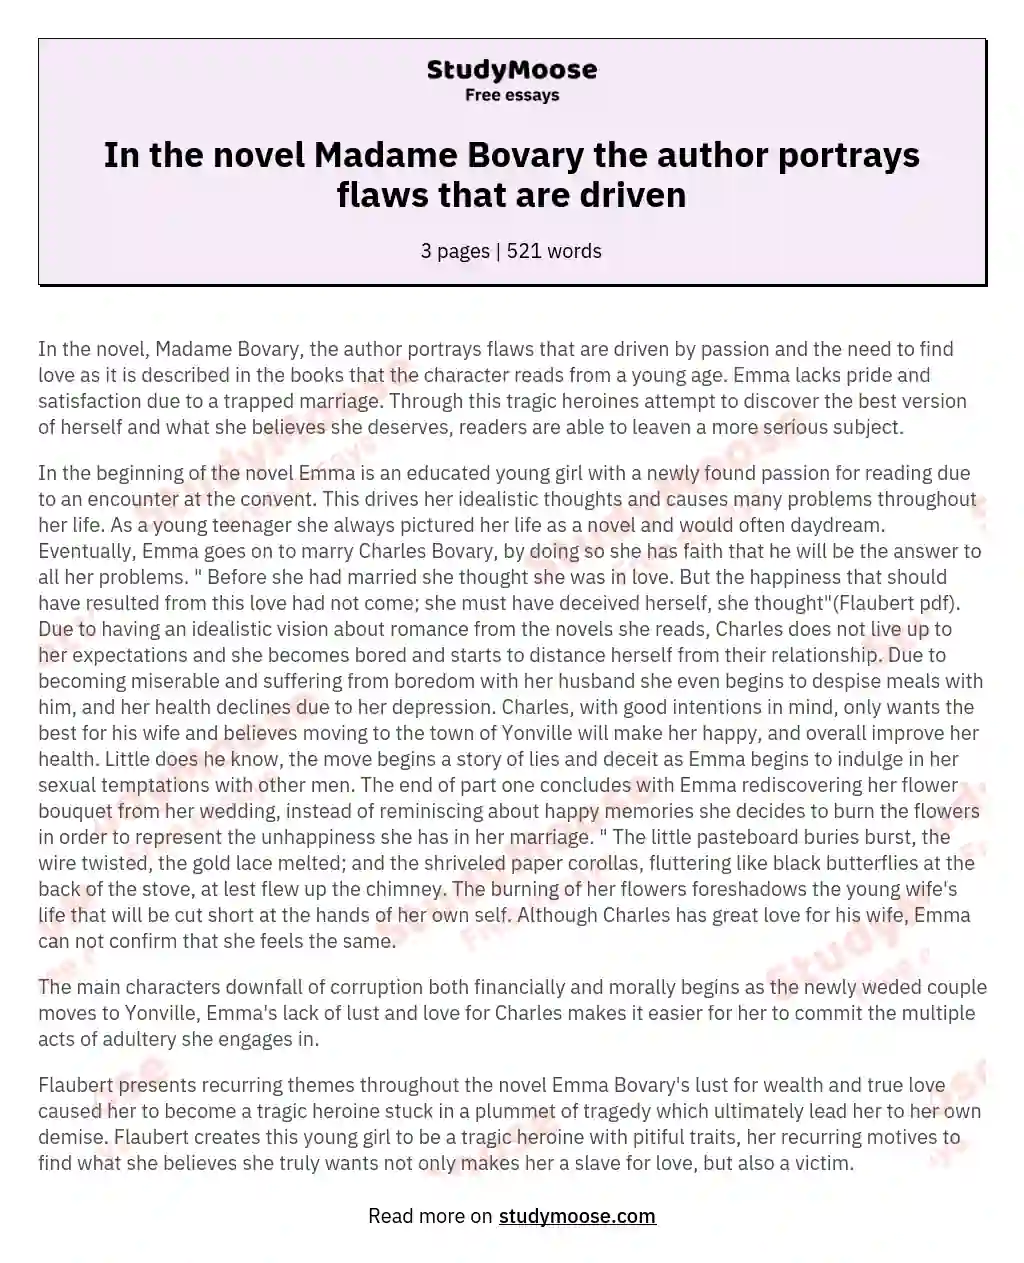 In the novel Madame Bovary the author portrays flaws that are driven